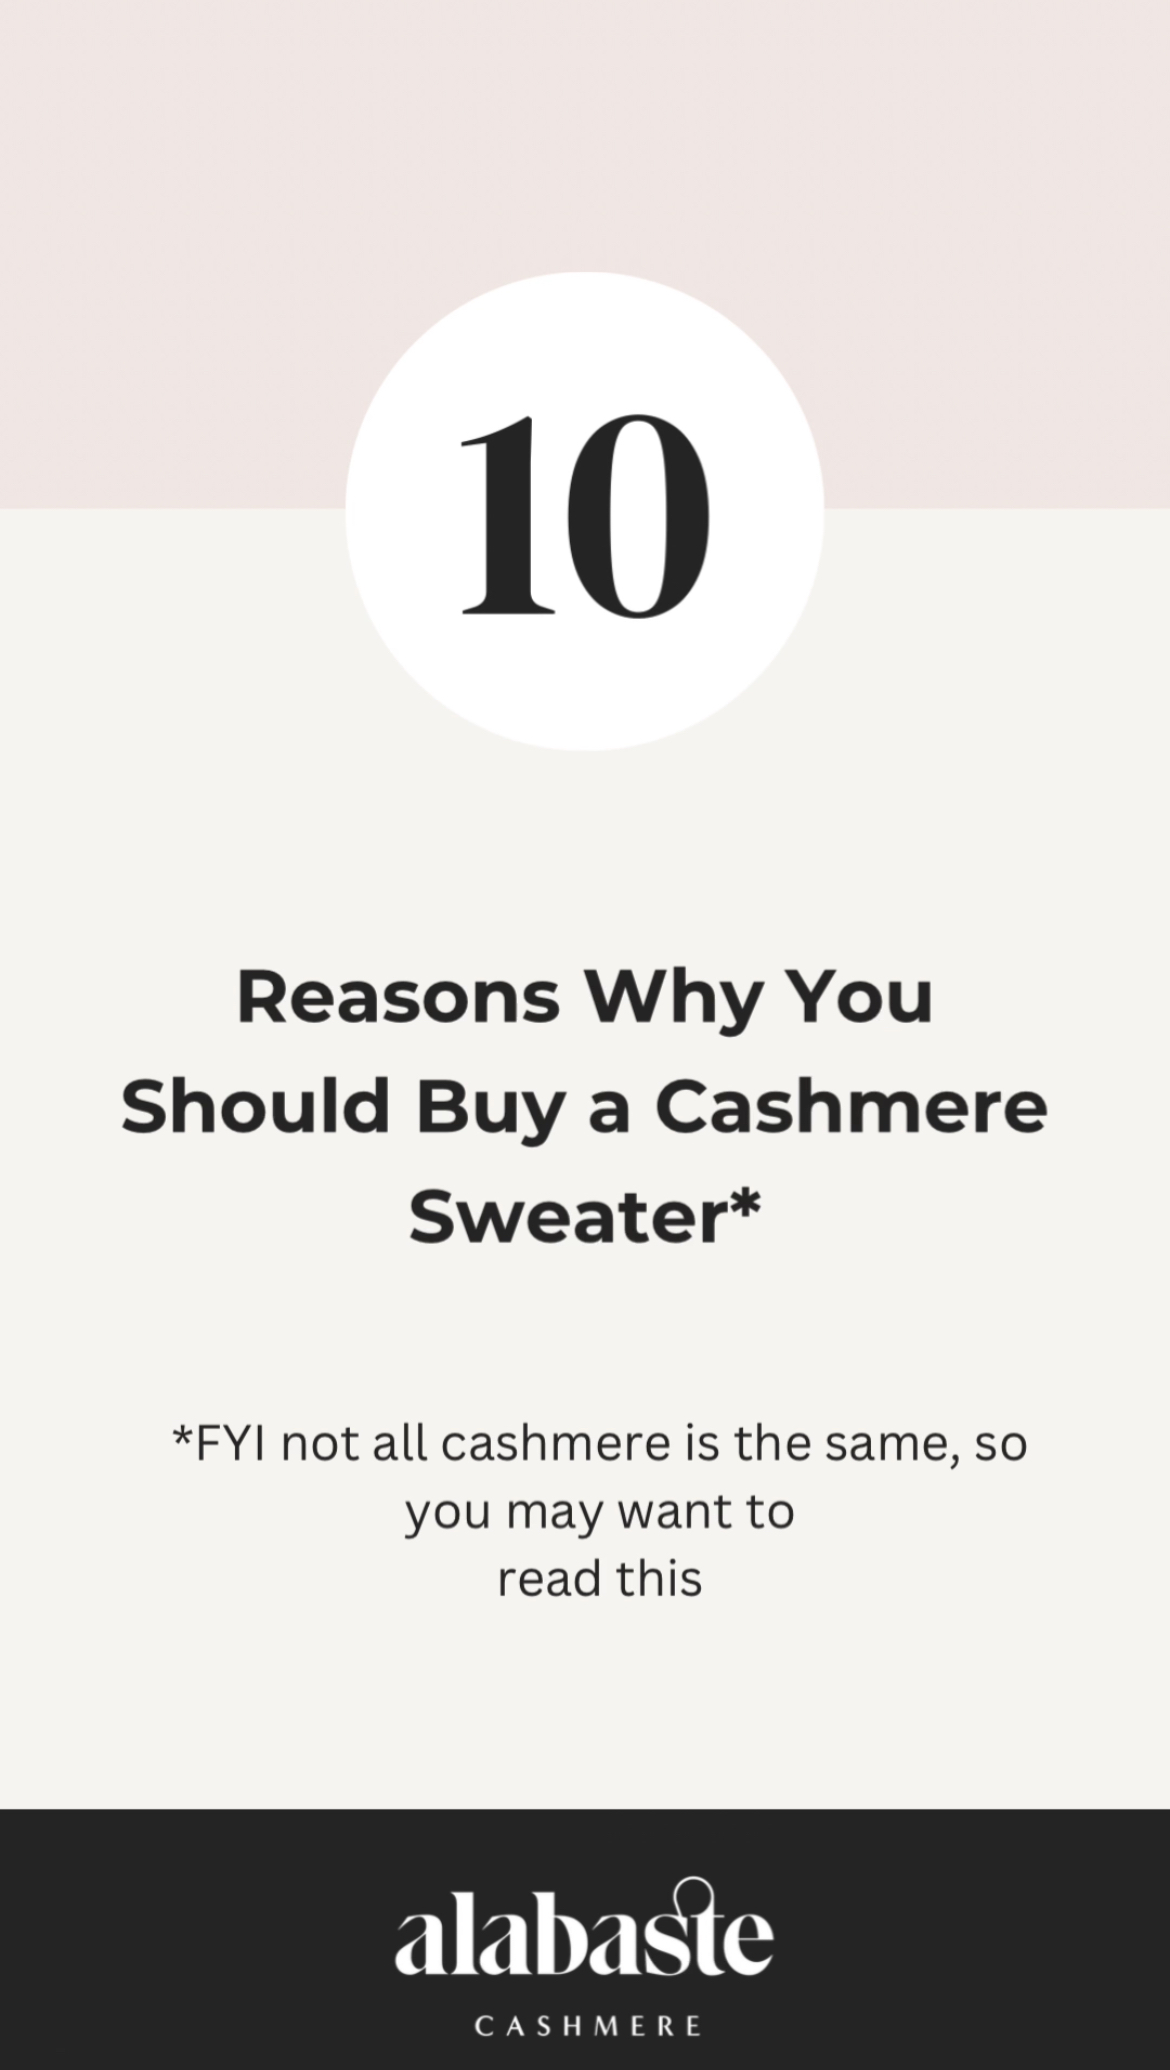 Alabaste Cashmere: 10 Reasons why you should buy a cashmere sweater 